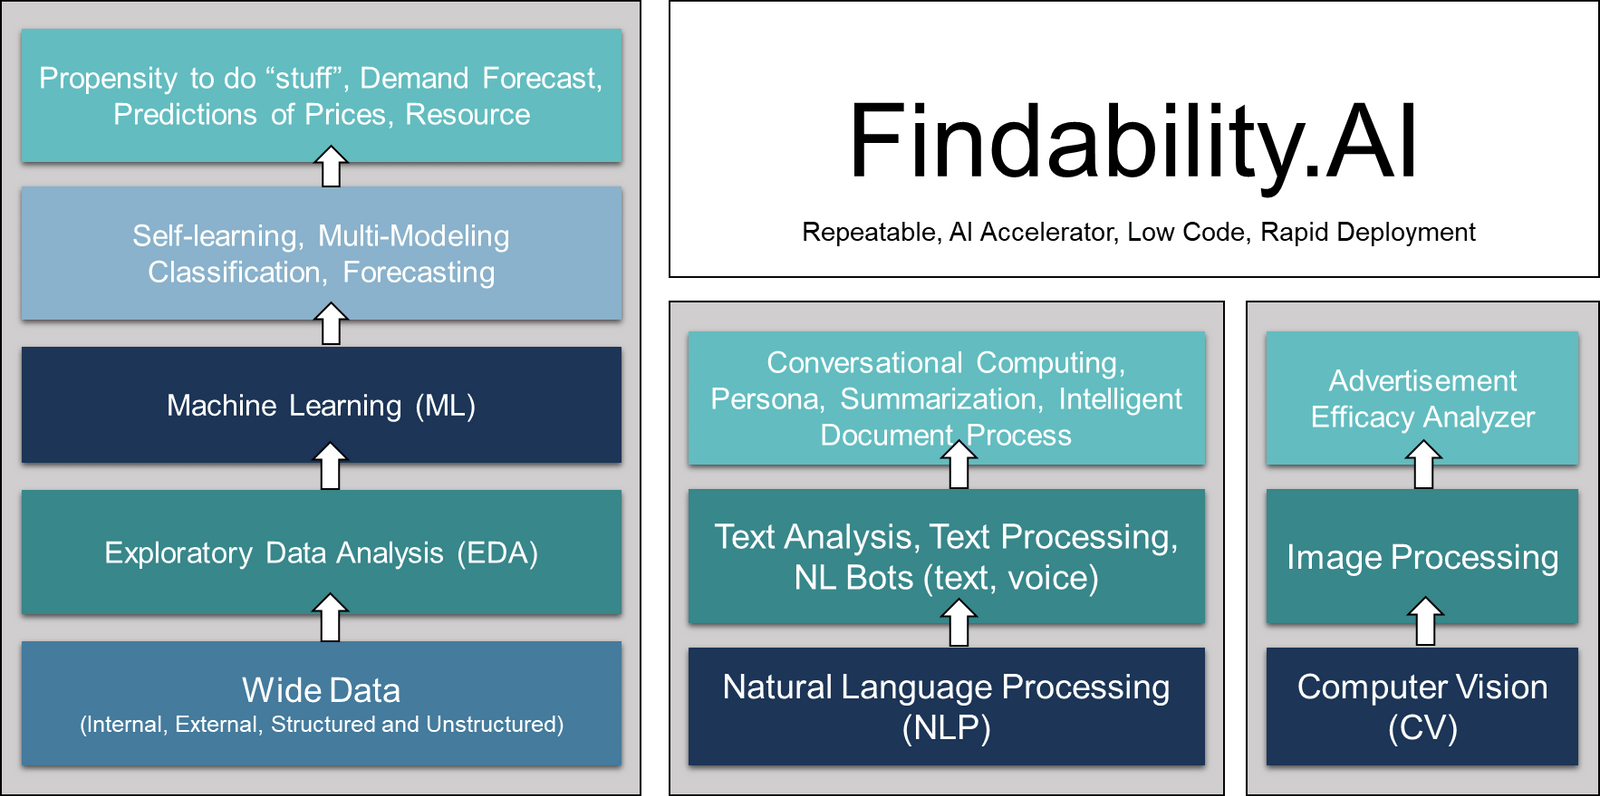 Findability.ai for business